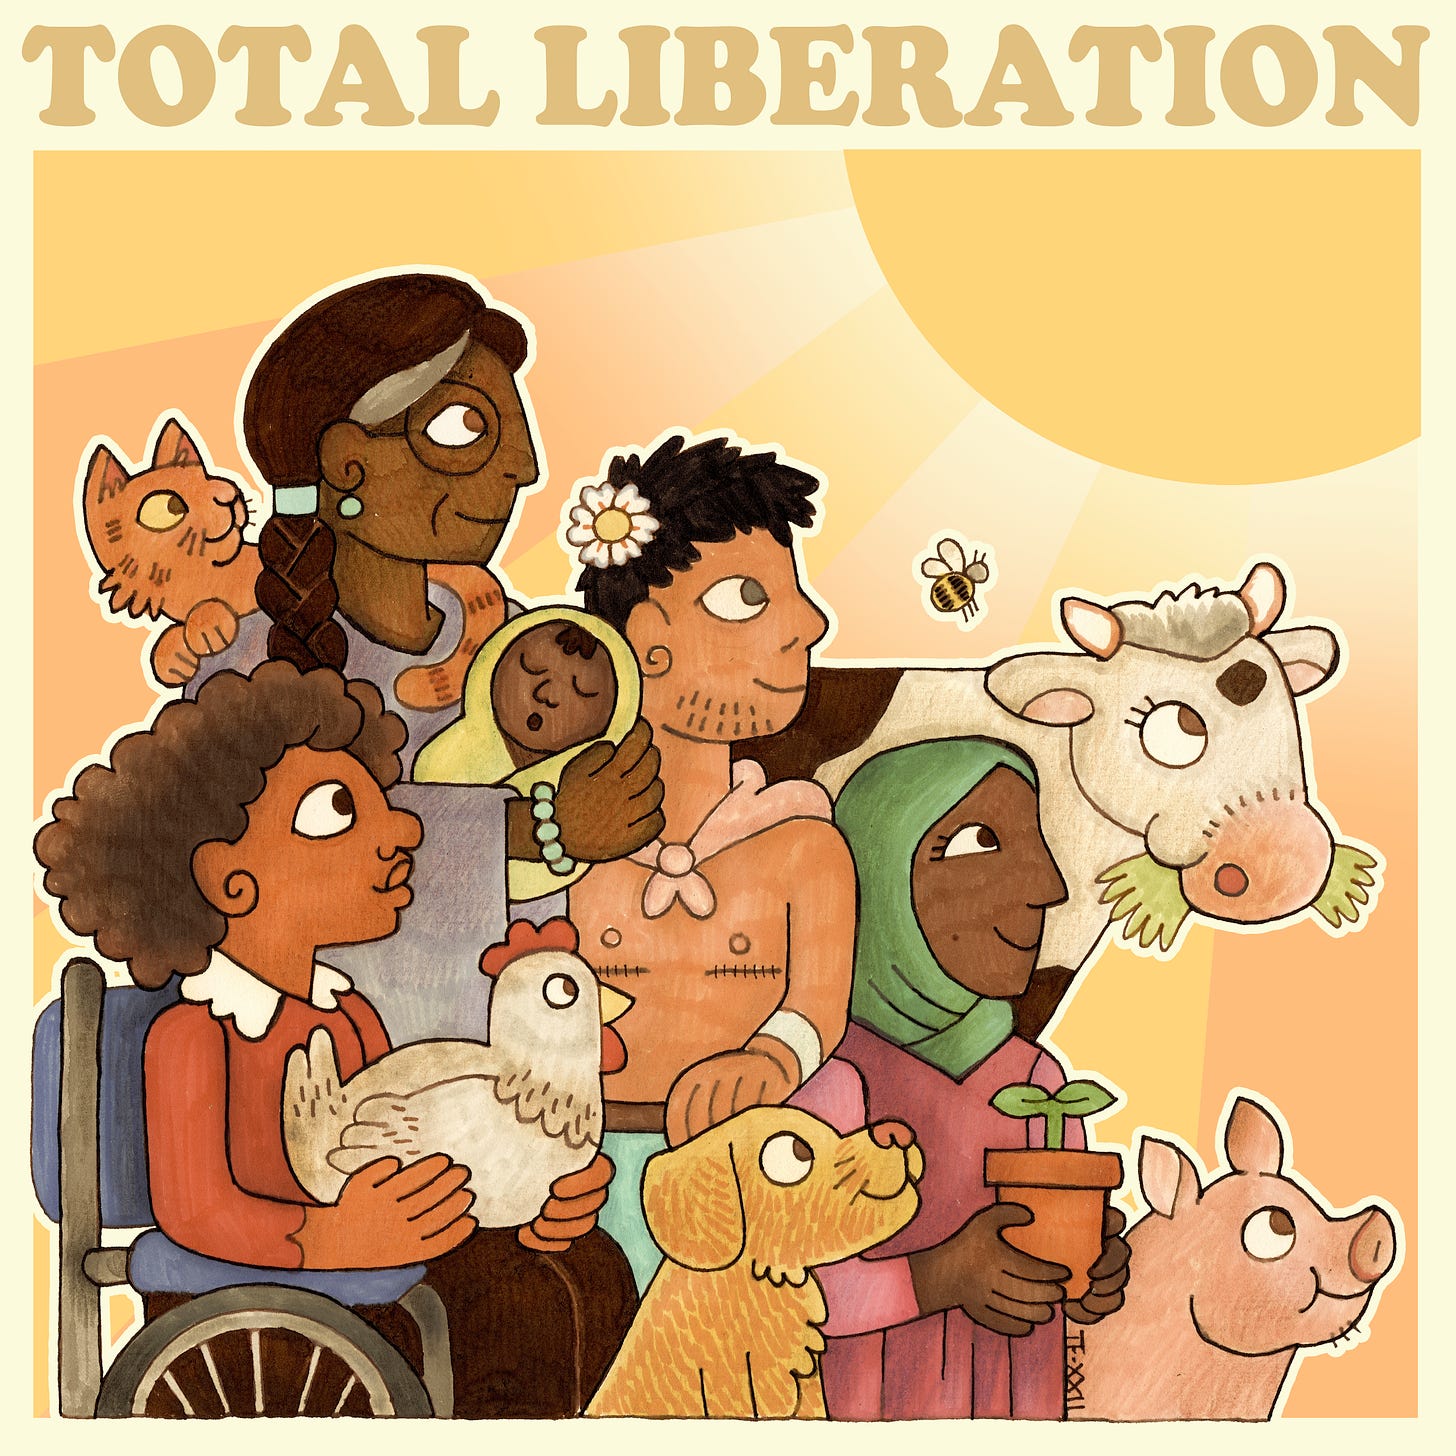 Traditionally hand drawn illustration of several humans and animals looking up at a rising sun. The humans are of various ethnicities, gender identities and body types, and the animals include a cat, dog, chicken, pig, cow and bumblebee.